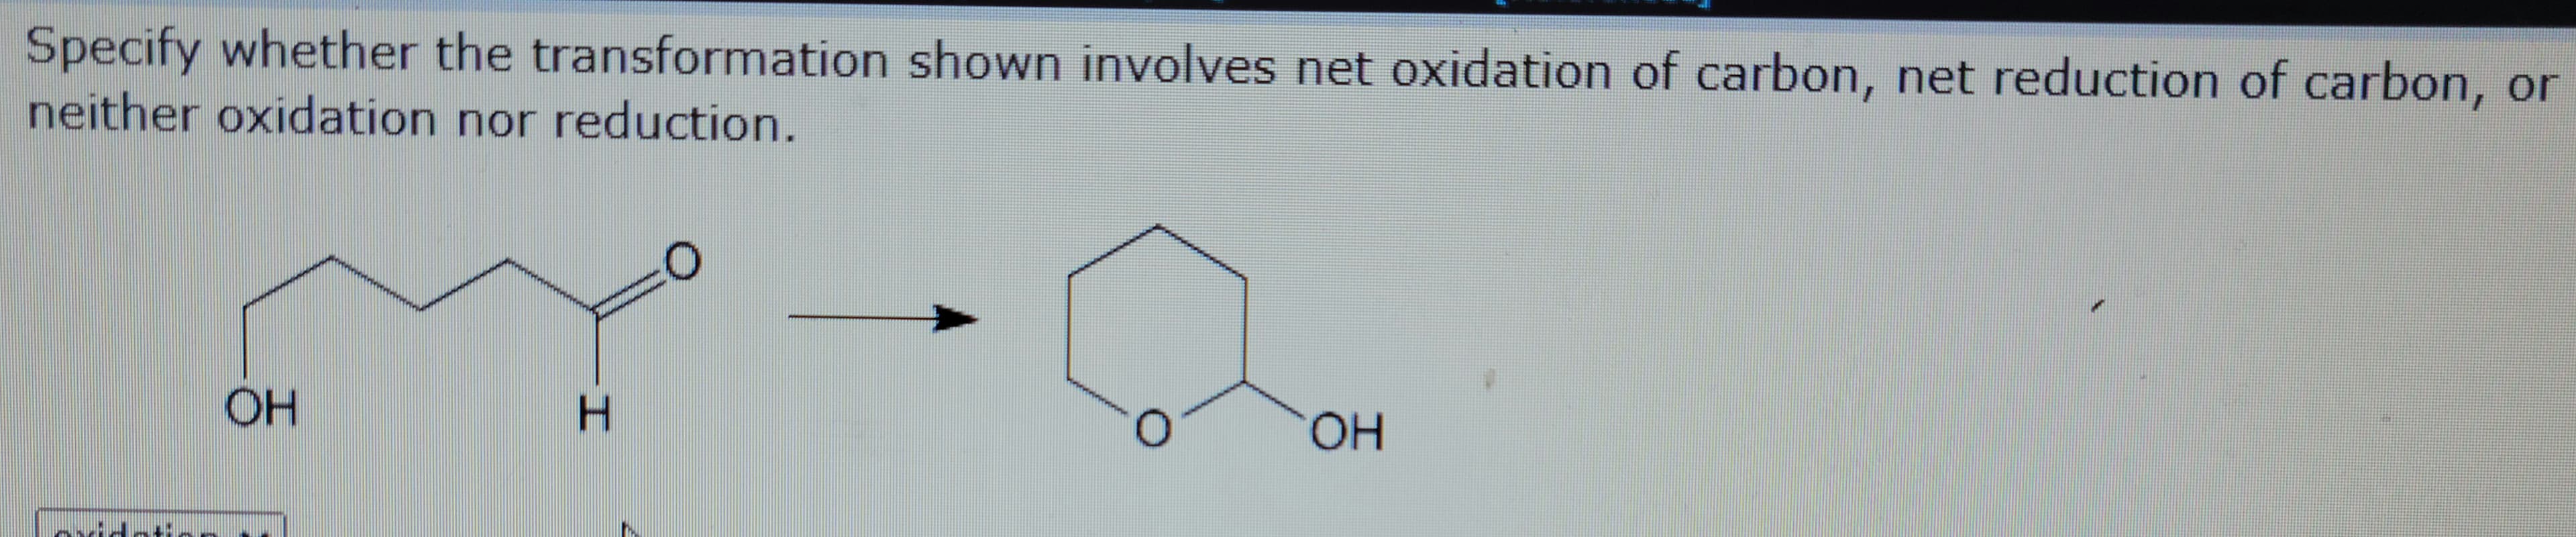 Specify whether the transformation shown involves net oxidation of carbon, net reduction of carbon, or
neither oxidation nor reduction.
OH
H
O
F
OH